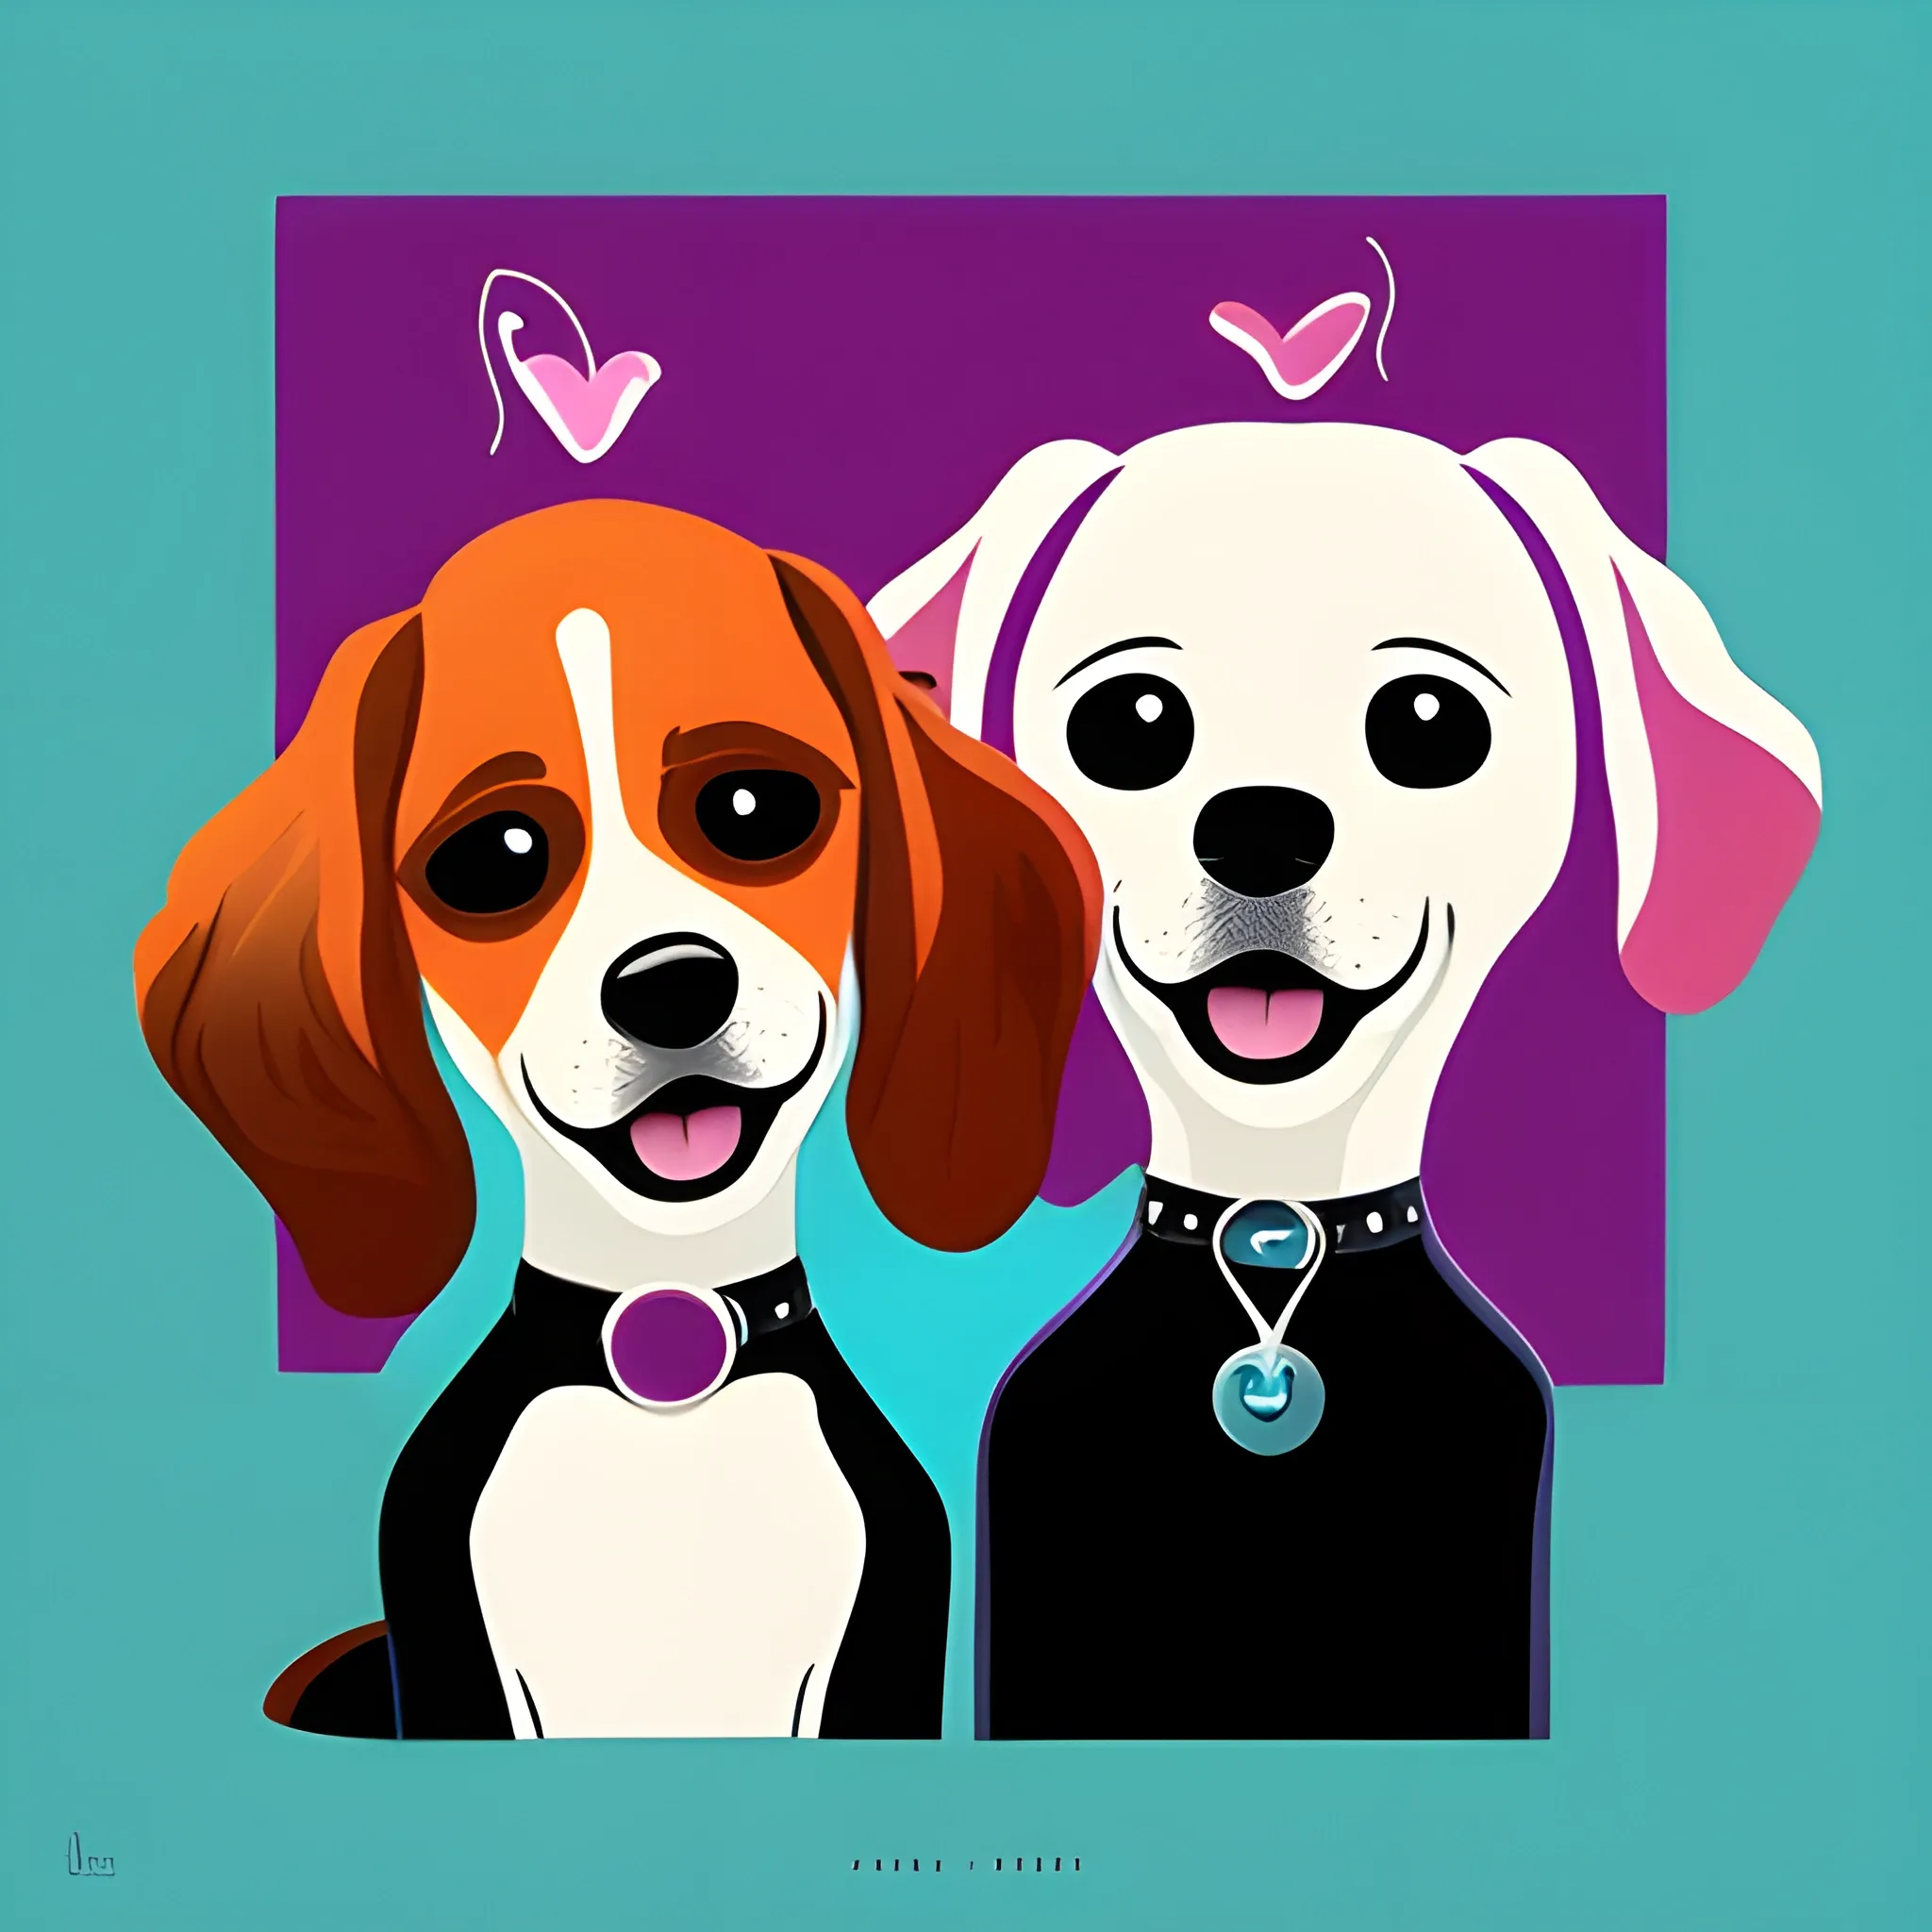 Create a modern rock album cover, where there is a dog in love with a dog, cartoon type, get inspired by the elegance of modern art and make everything as true to reality as possible.